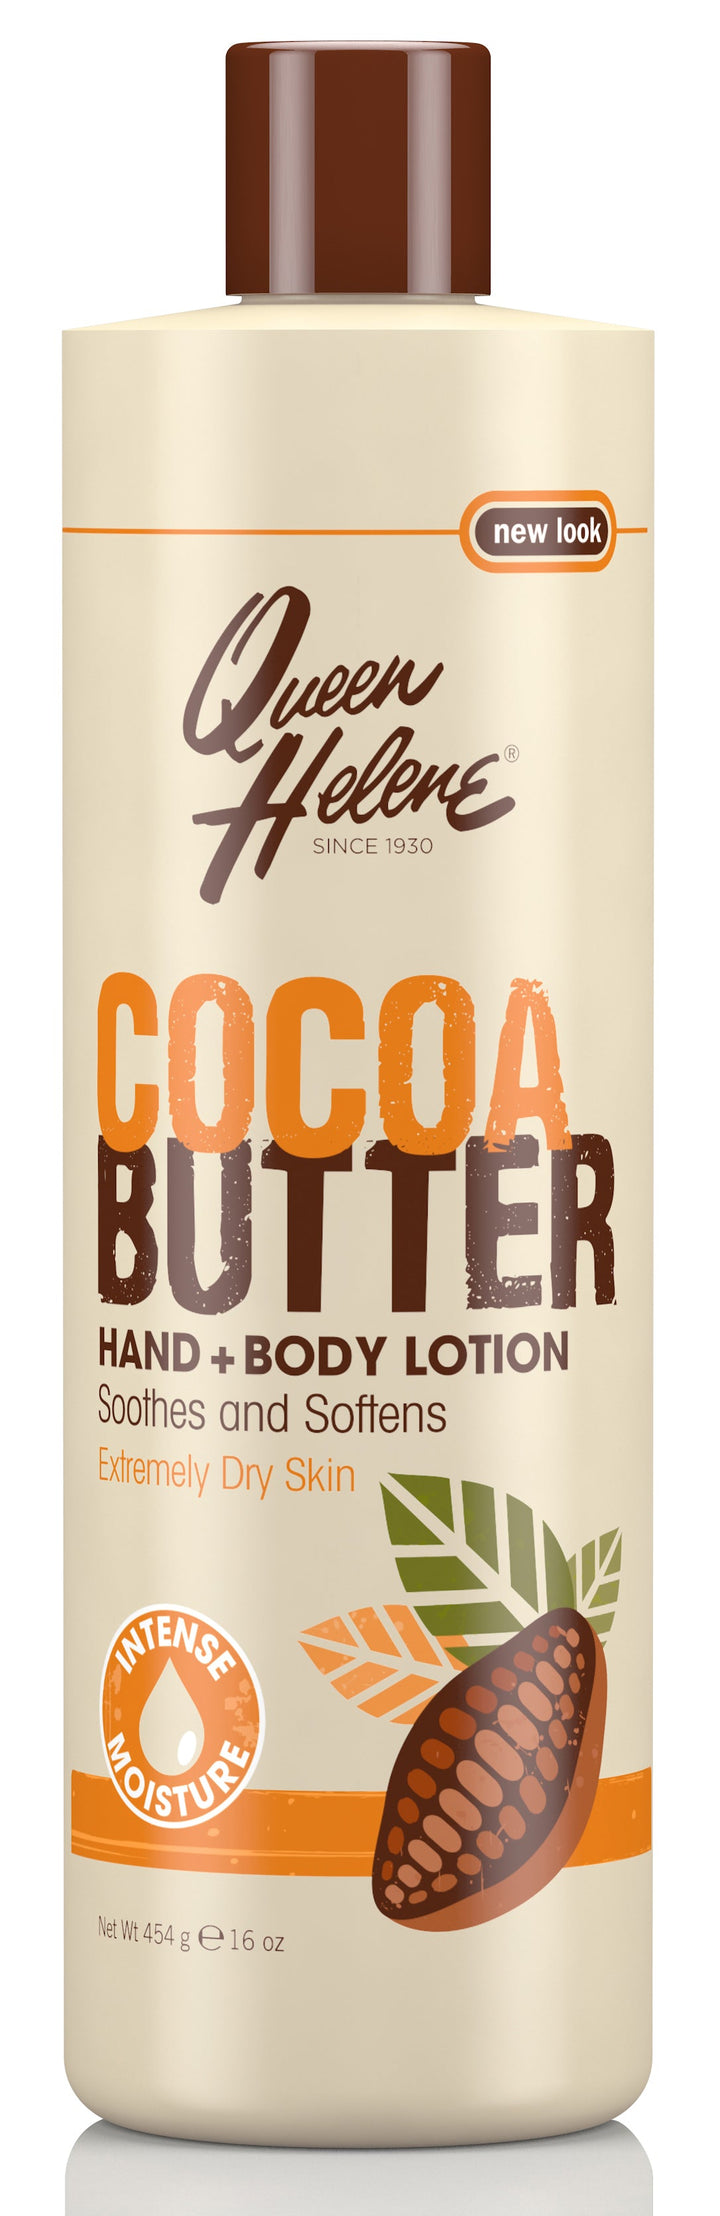 Queen Helene Cocoa Butter Hand & Body Lotion. 16oz/ 454g